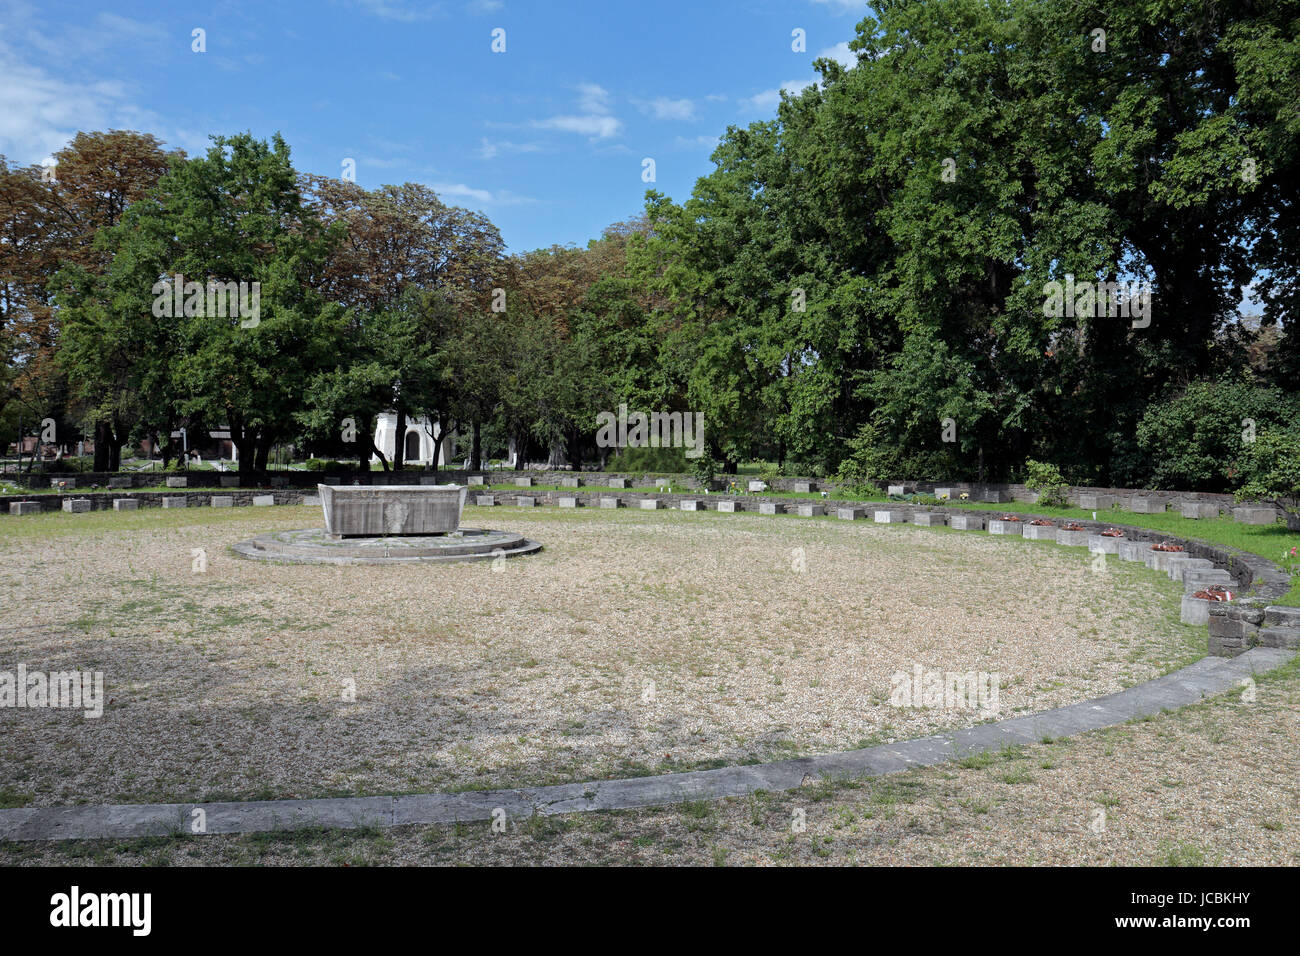 Monument to the Hungarian communist dead from the 1956 Revolution, Kerepesi Cemetery, Budapest, Hungary. Stock Photo